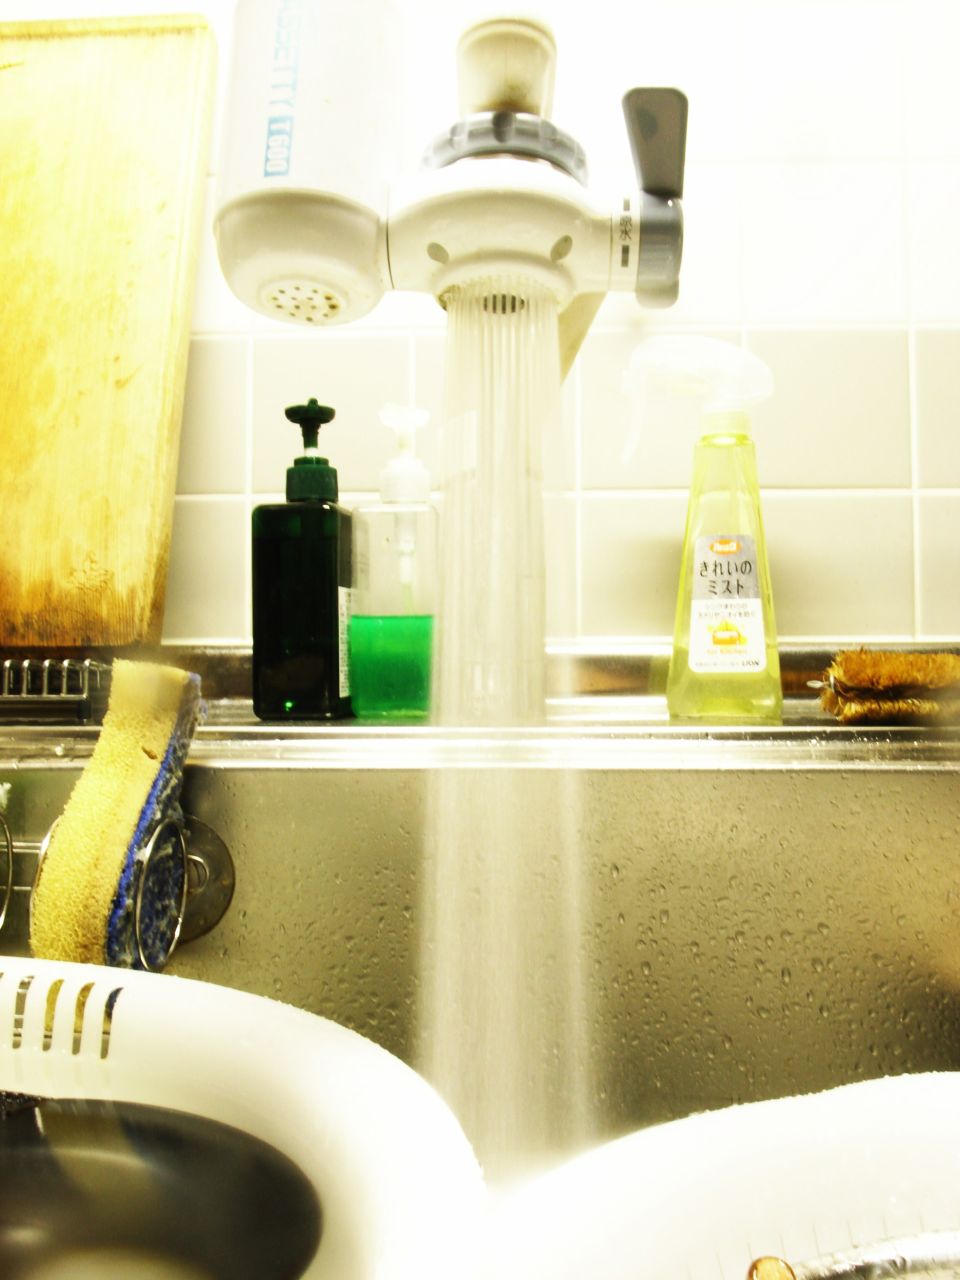 several soaps, water and toothbrushes are in a bathroom sink